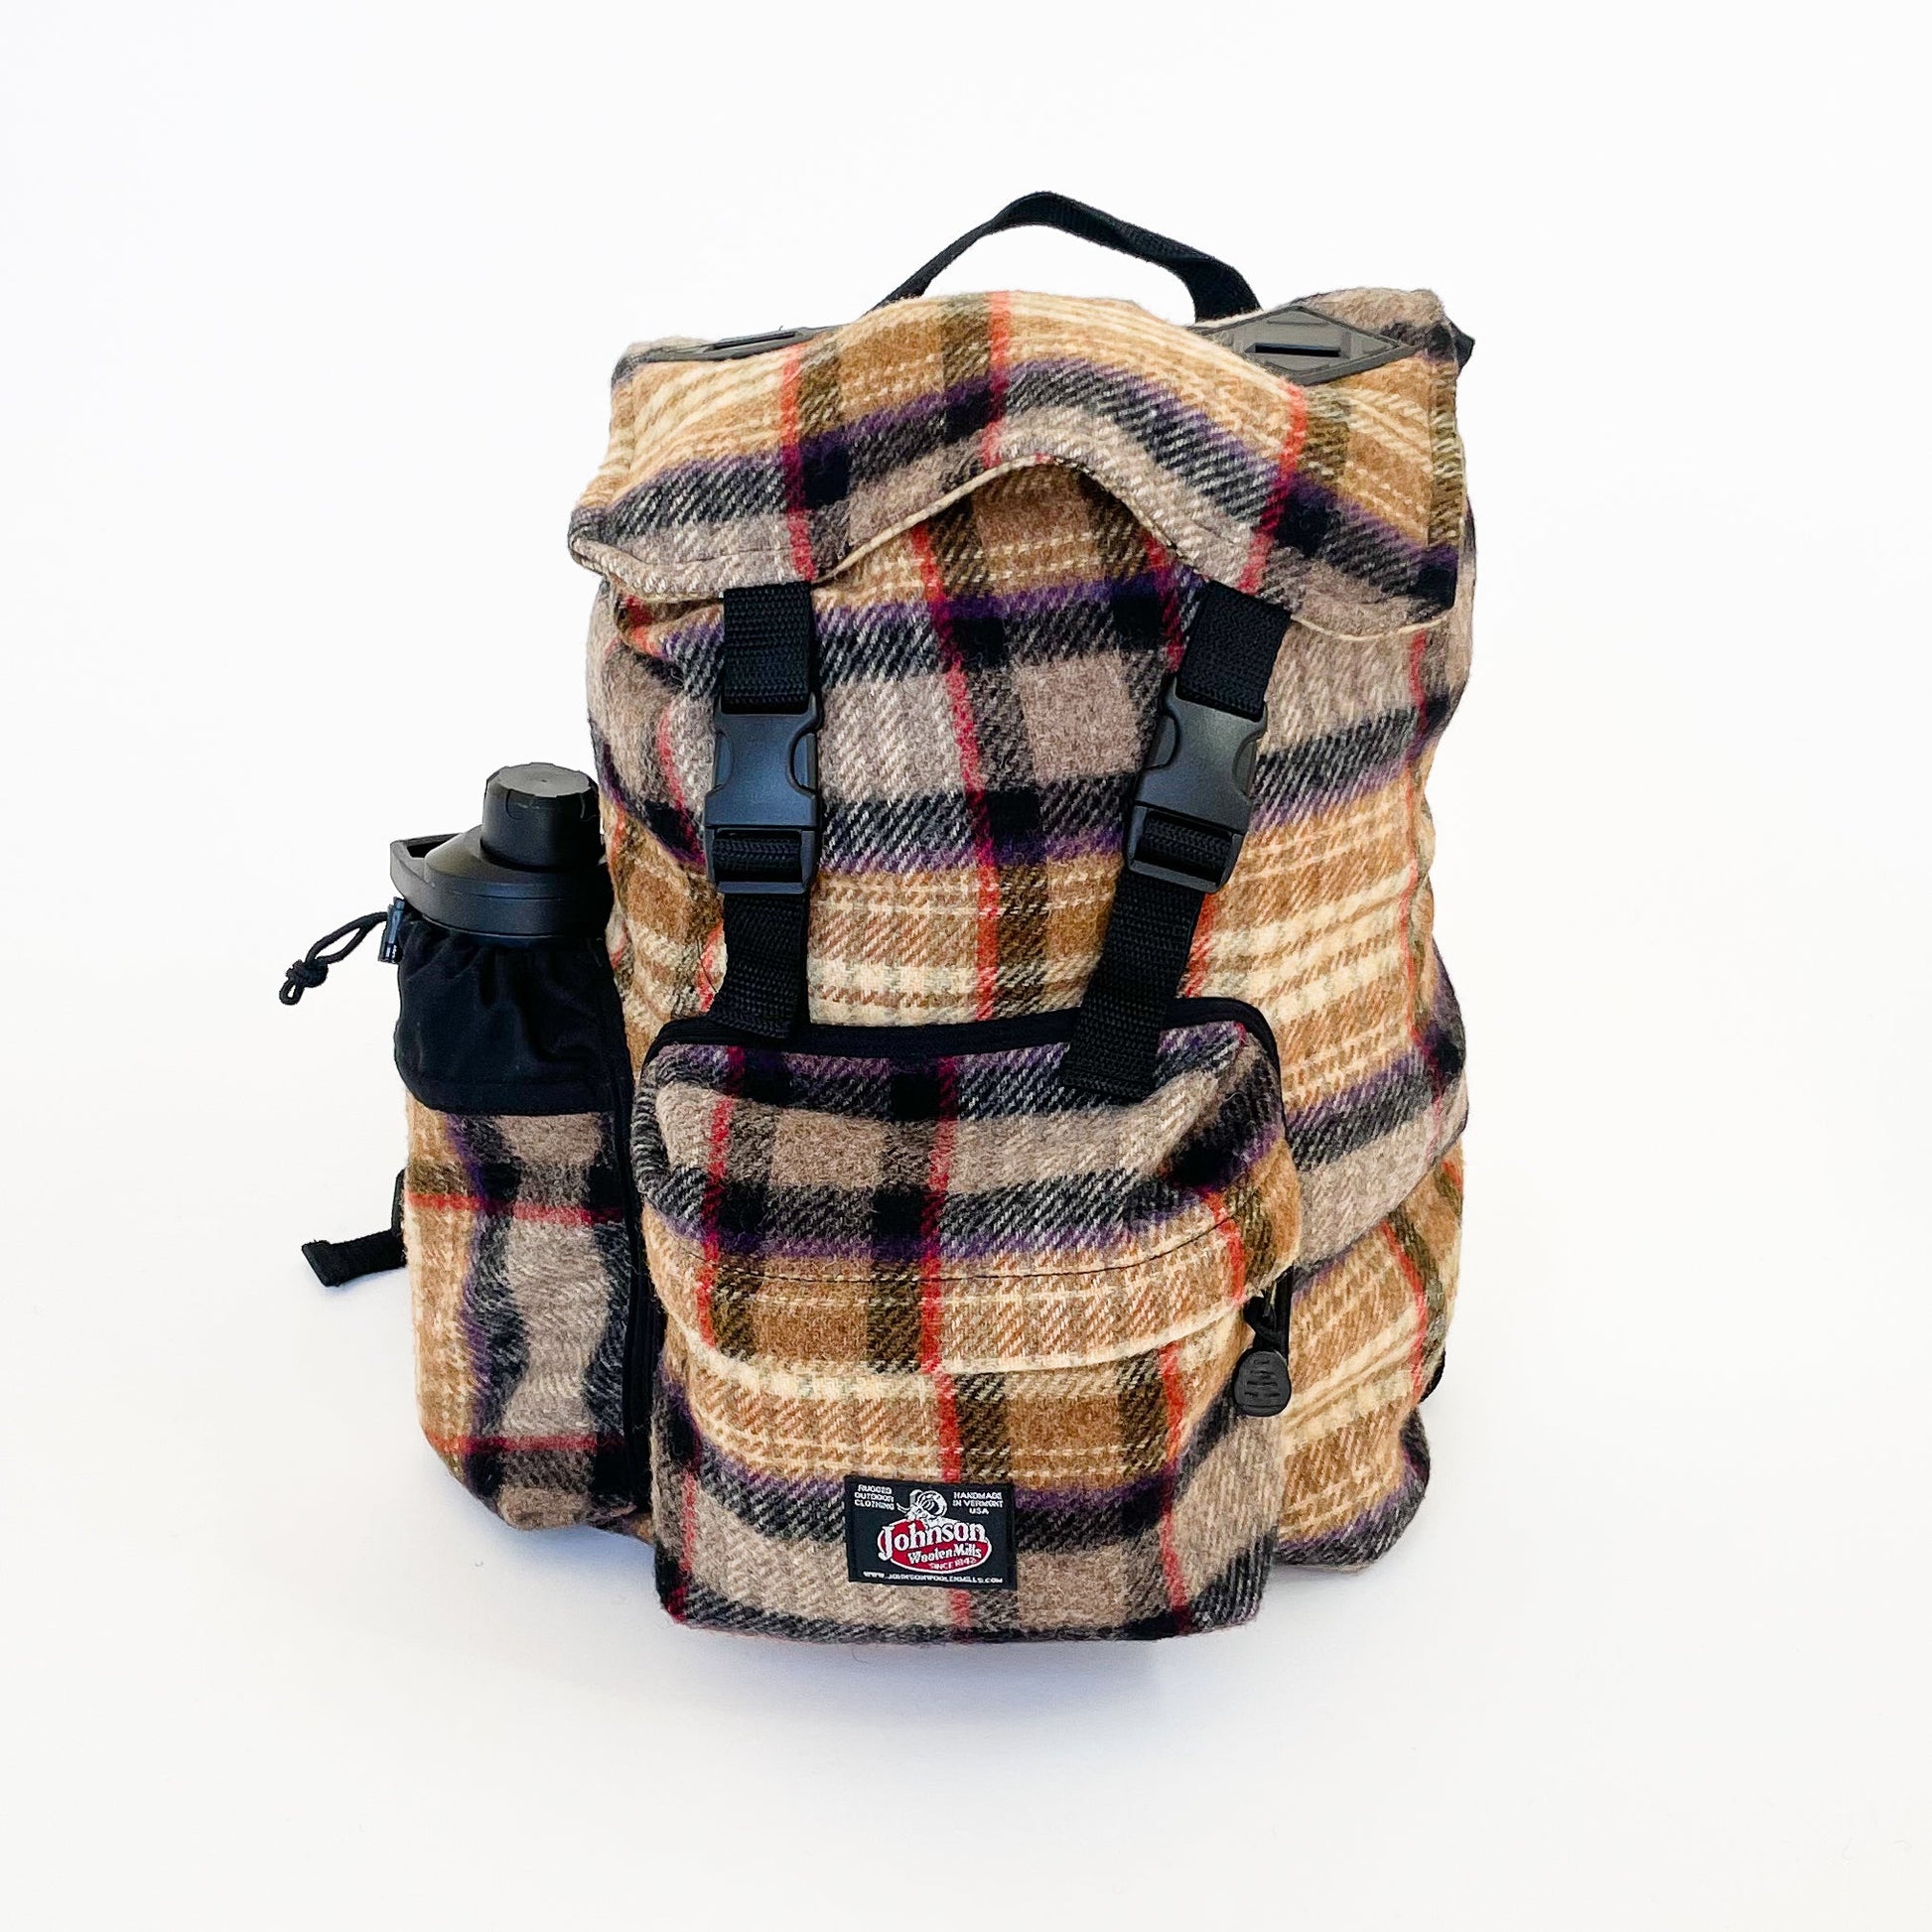 Wool back pack in gold, black and red plaid, shown with water bottle in side pocket